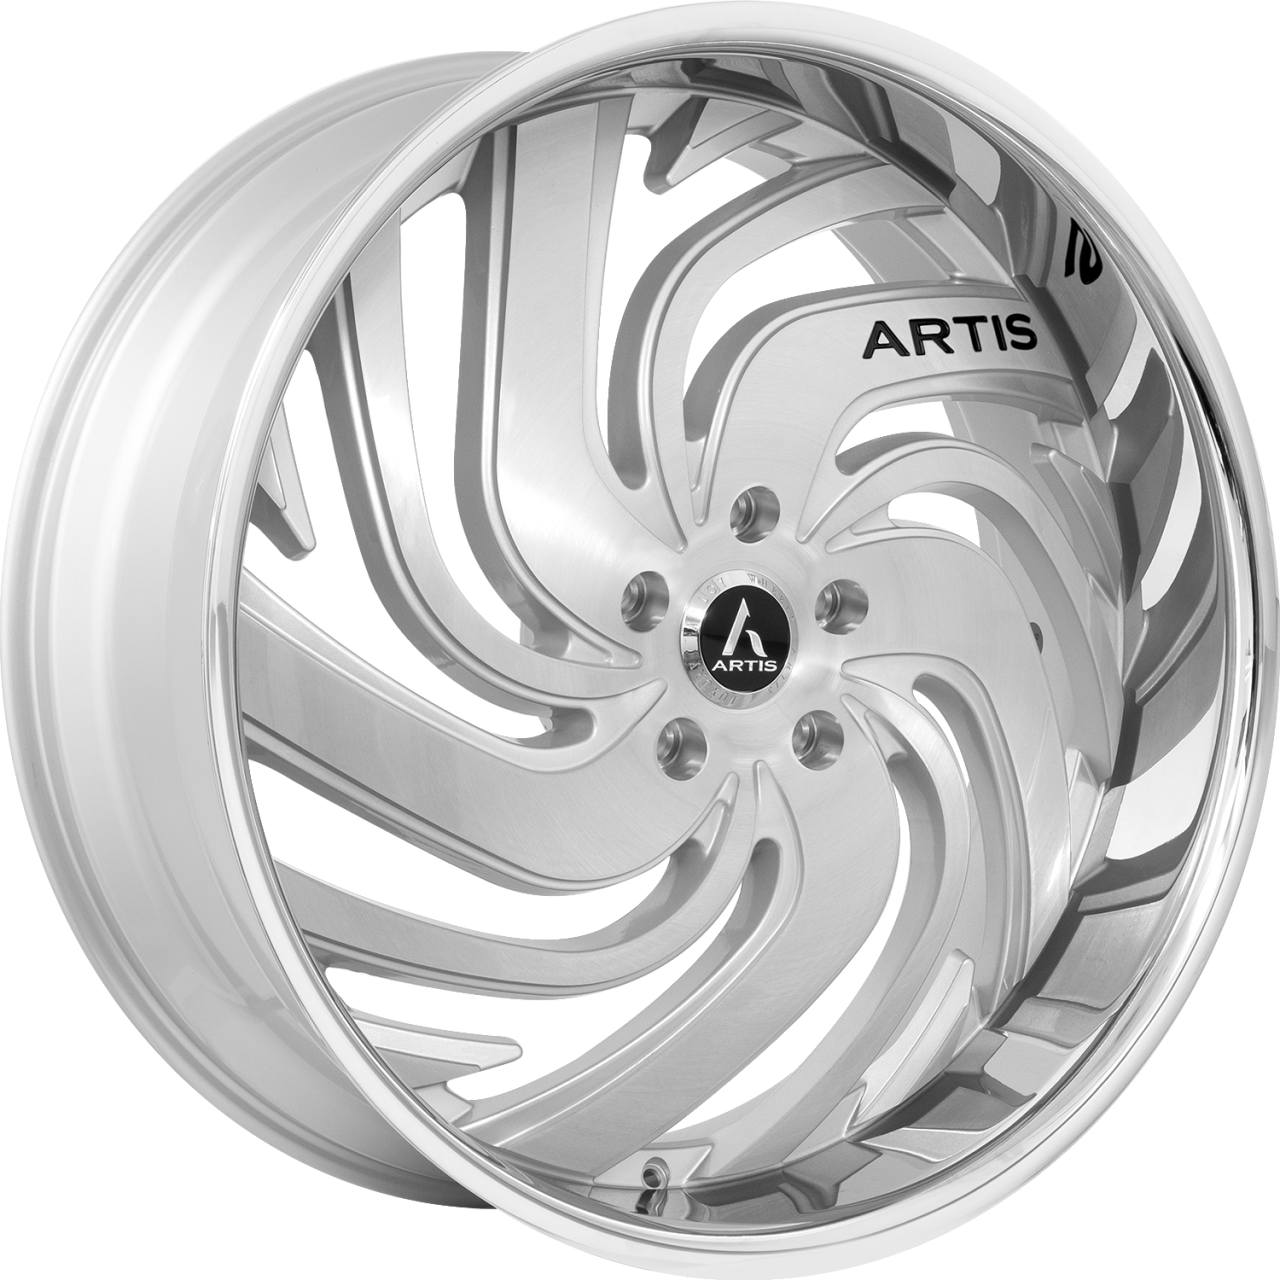 Artis Forged Fillmore wheel with Silver and Machined finish